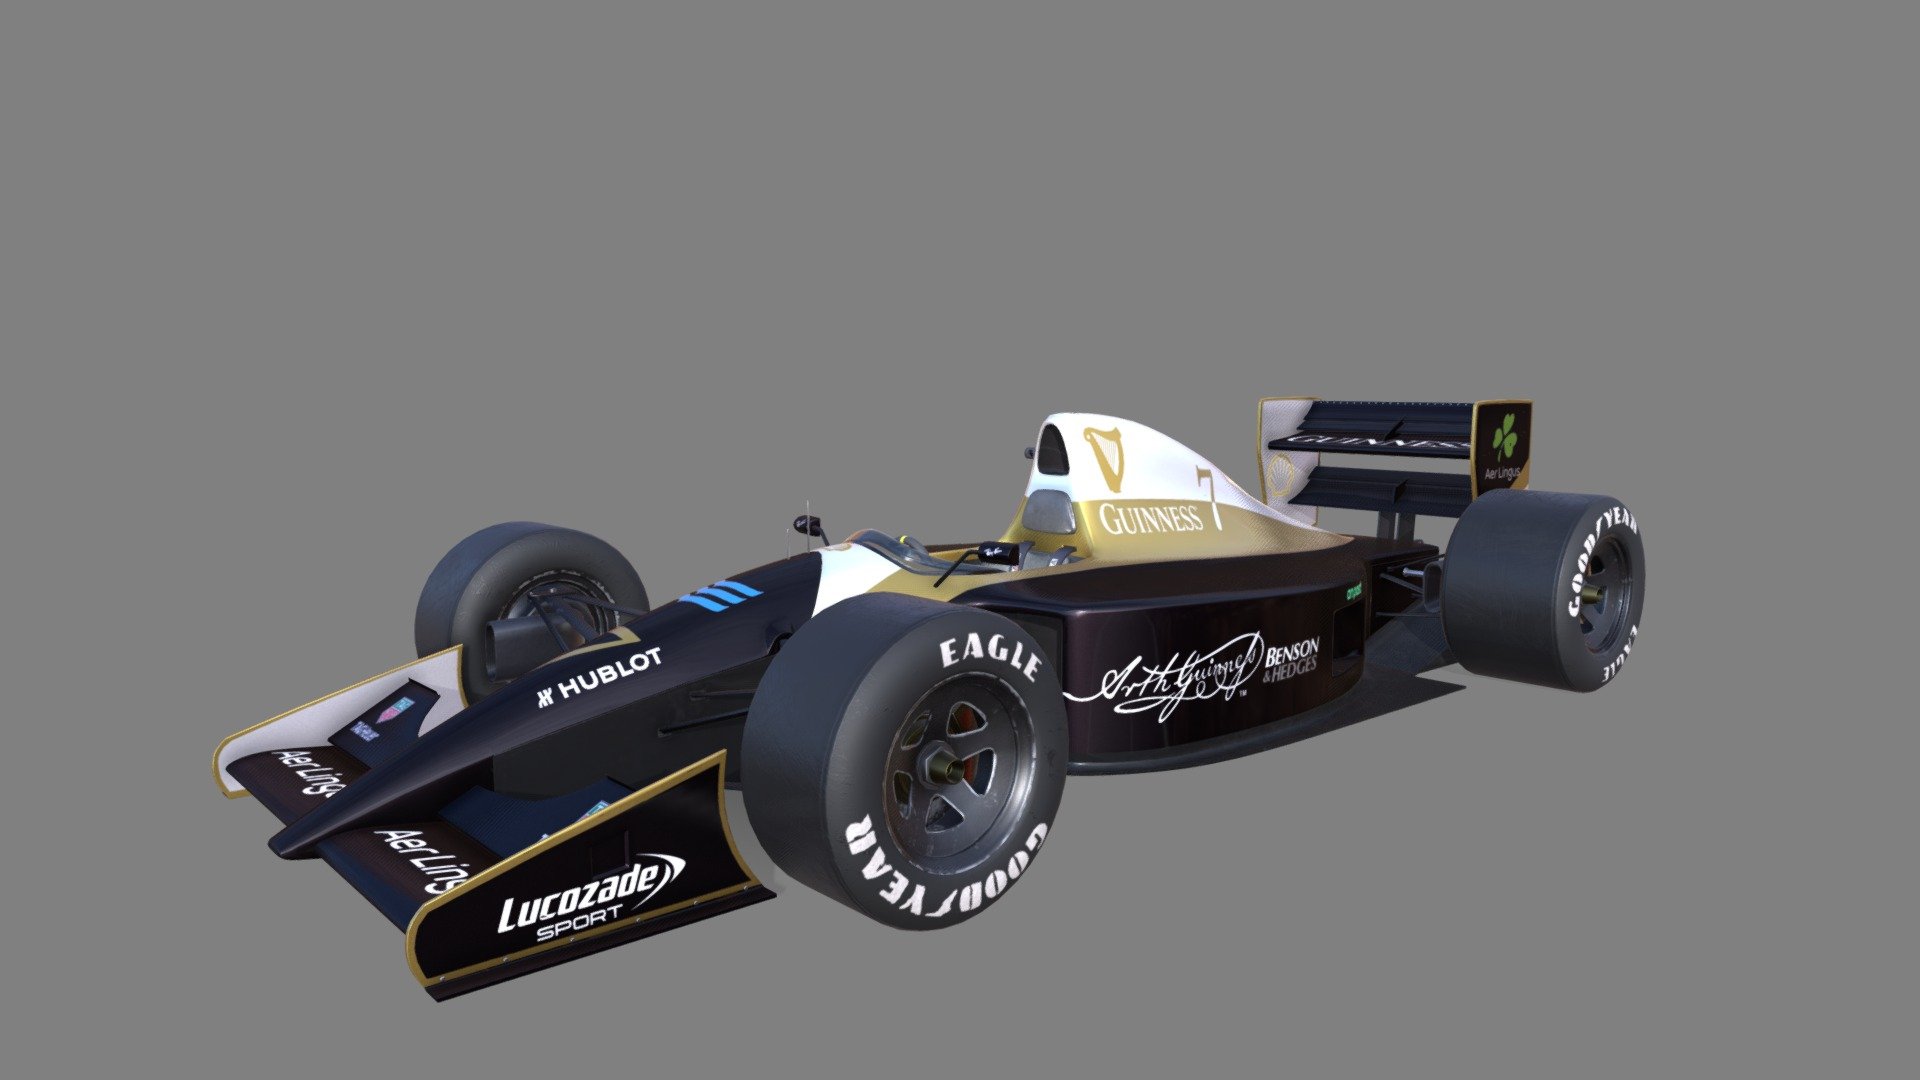 This is a 1991 F1 car with a Guinness livery on it. I threw in some other sponsors including Irish ones.

The car model was not done by me and was given to me by:

Sketchfab: Todor Malakchiev
ArtStation: Todor Malakchiev - 1991 Guinness F1 Car 3d model